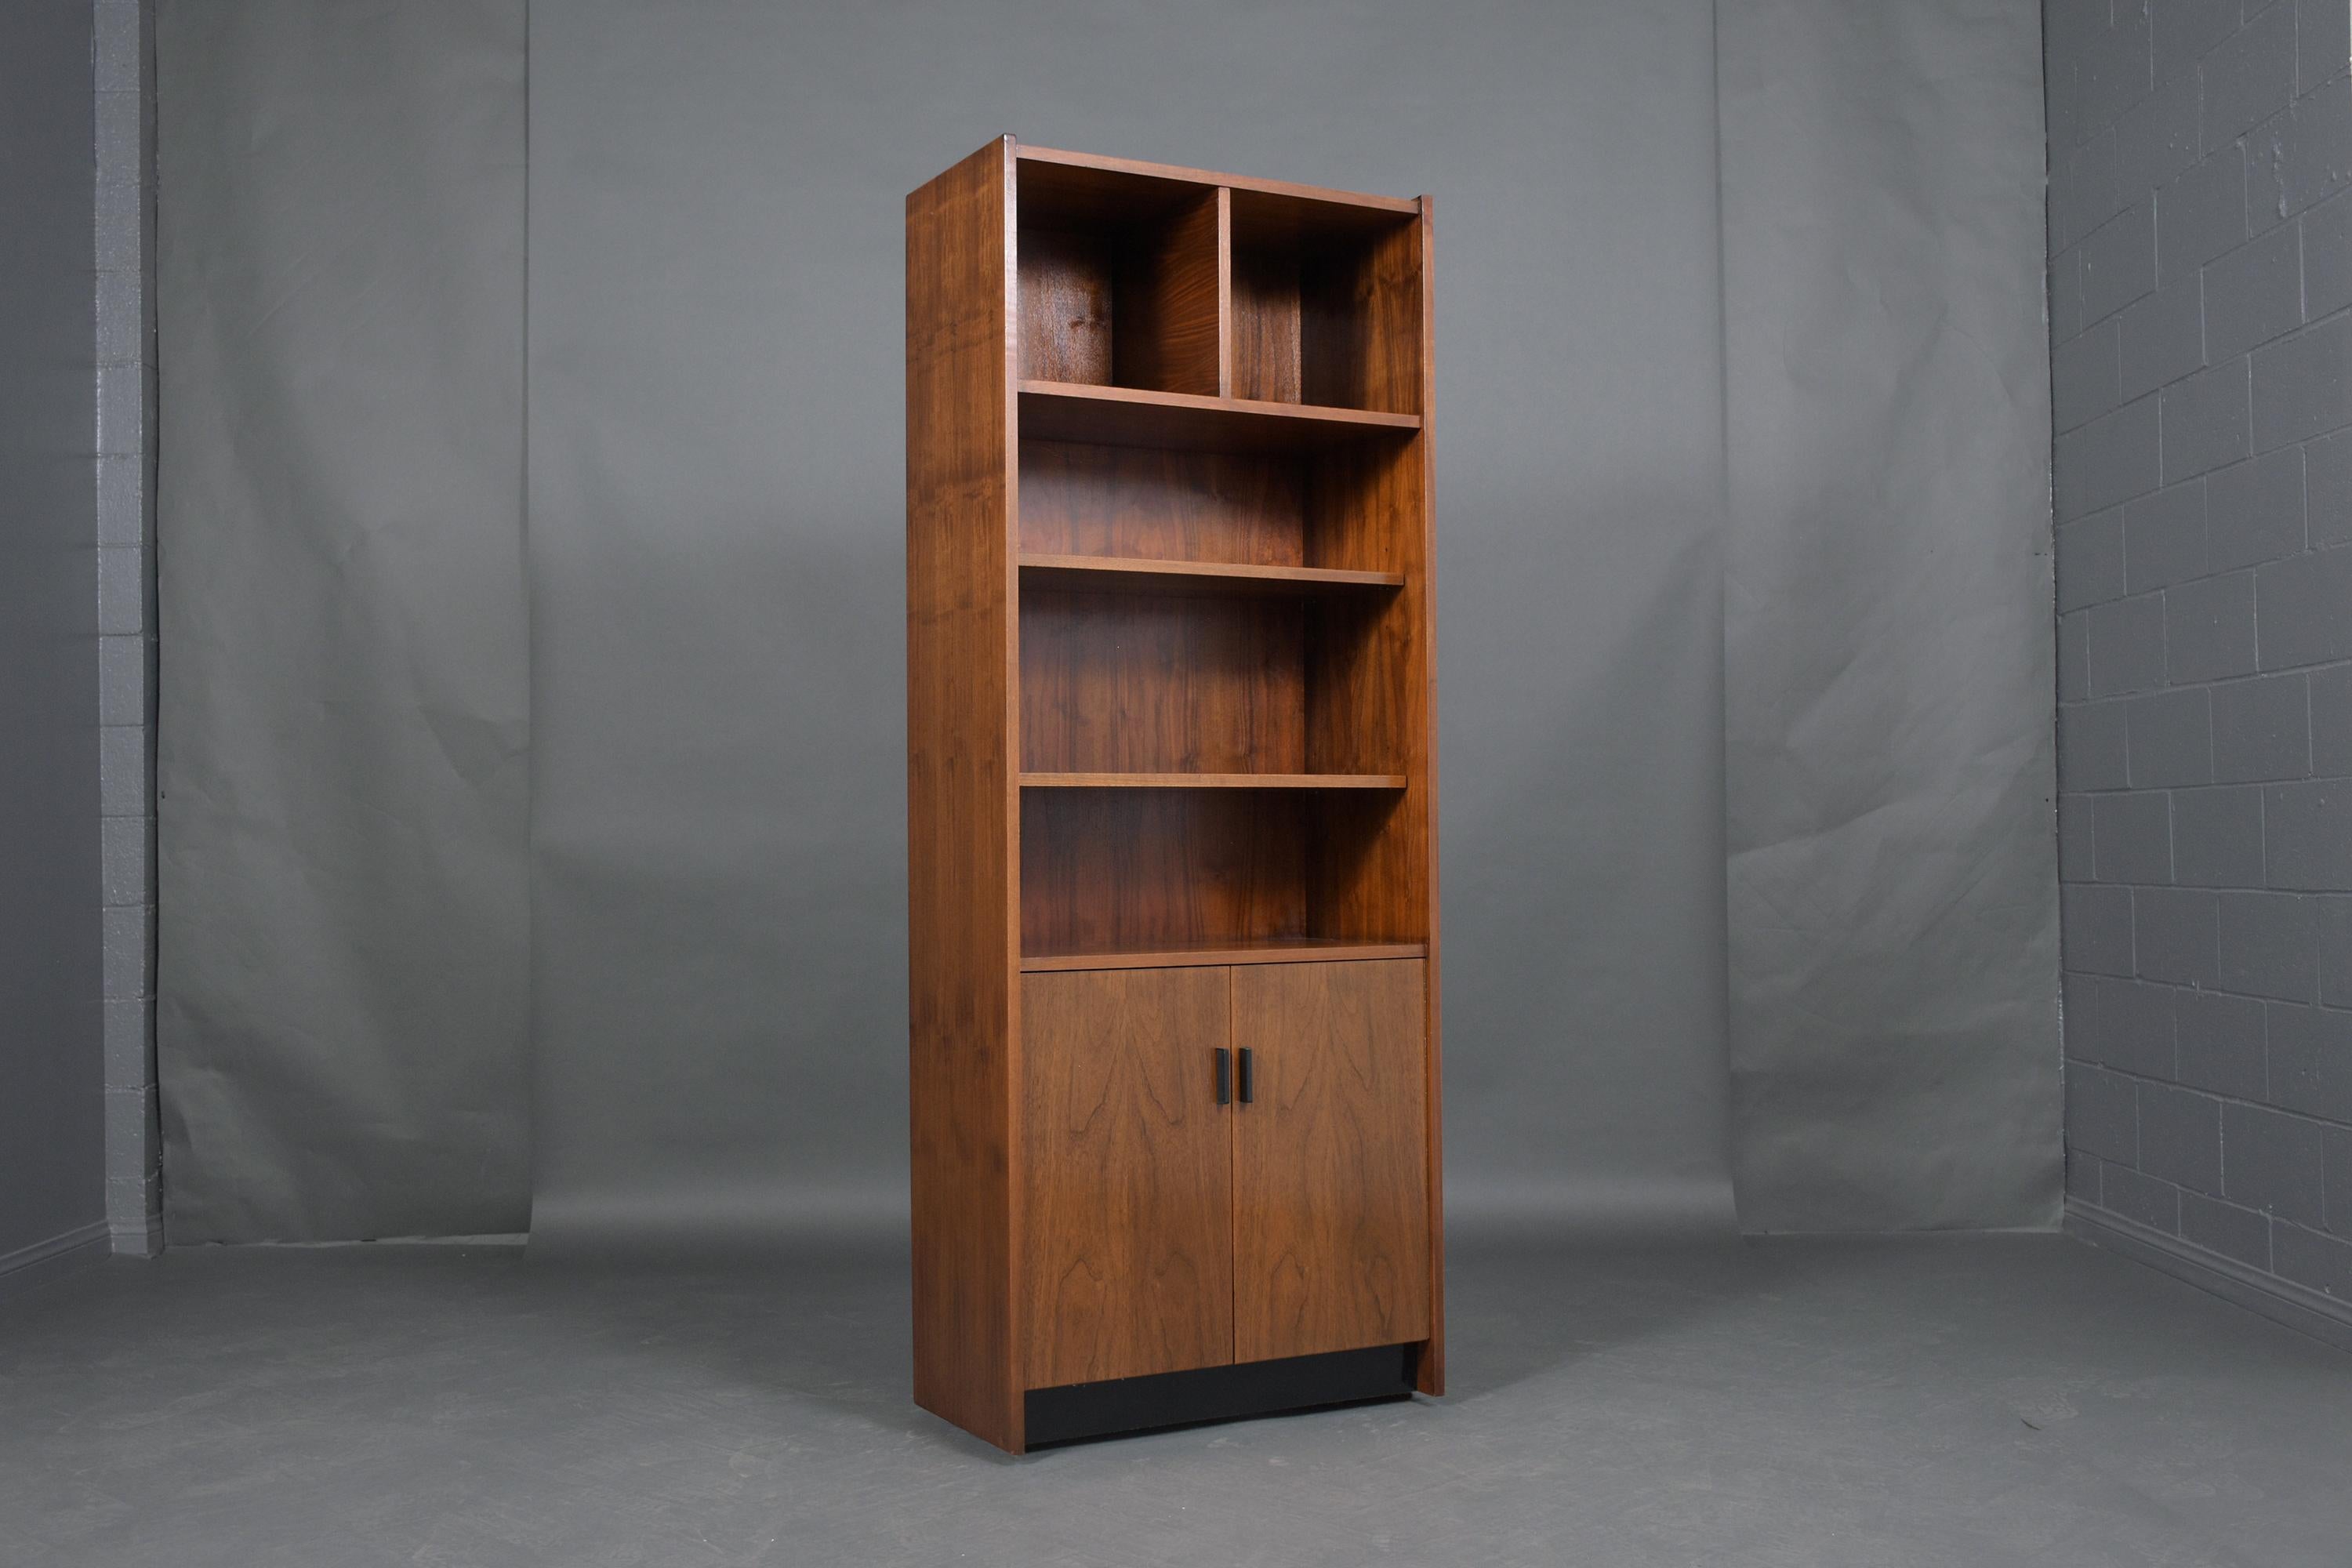 An extraordinary vintage mid-century modern bookcase is crafted out of walnut wood and has been professionally restored by our team of in-house craftsmen. This wall unit features two cubbies and two open shelves on the top half and the bottom comes